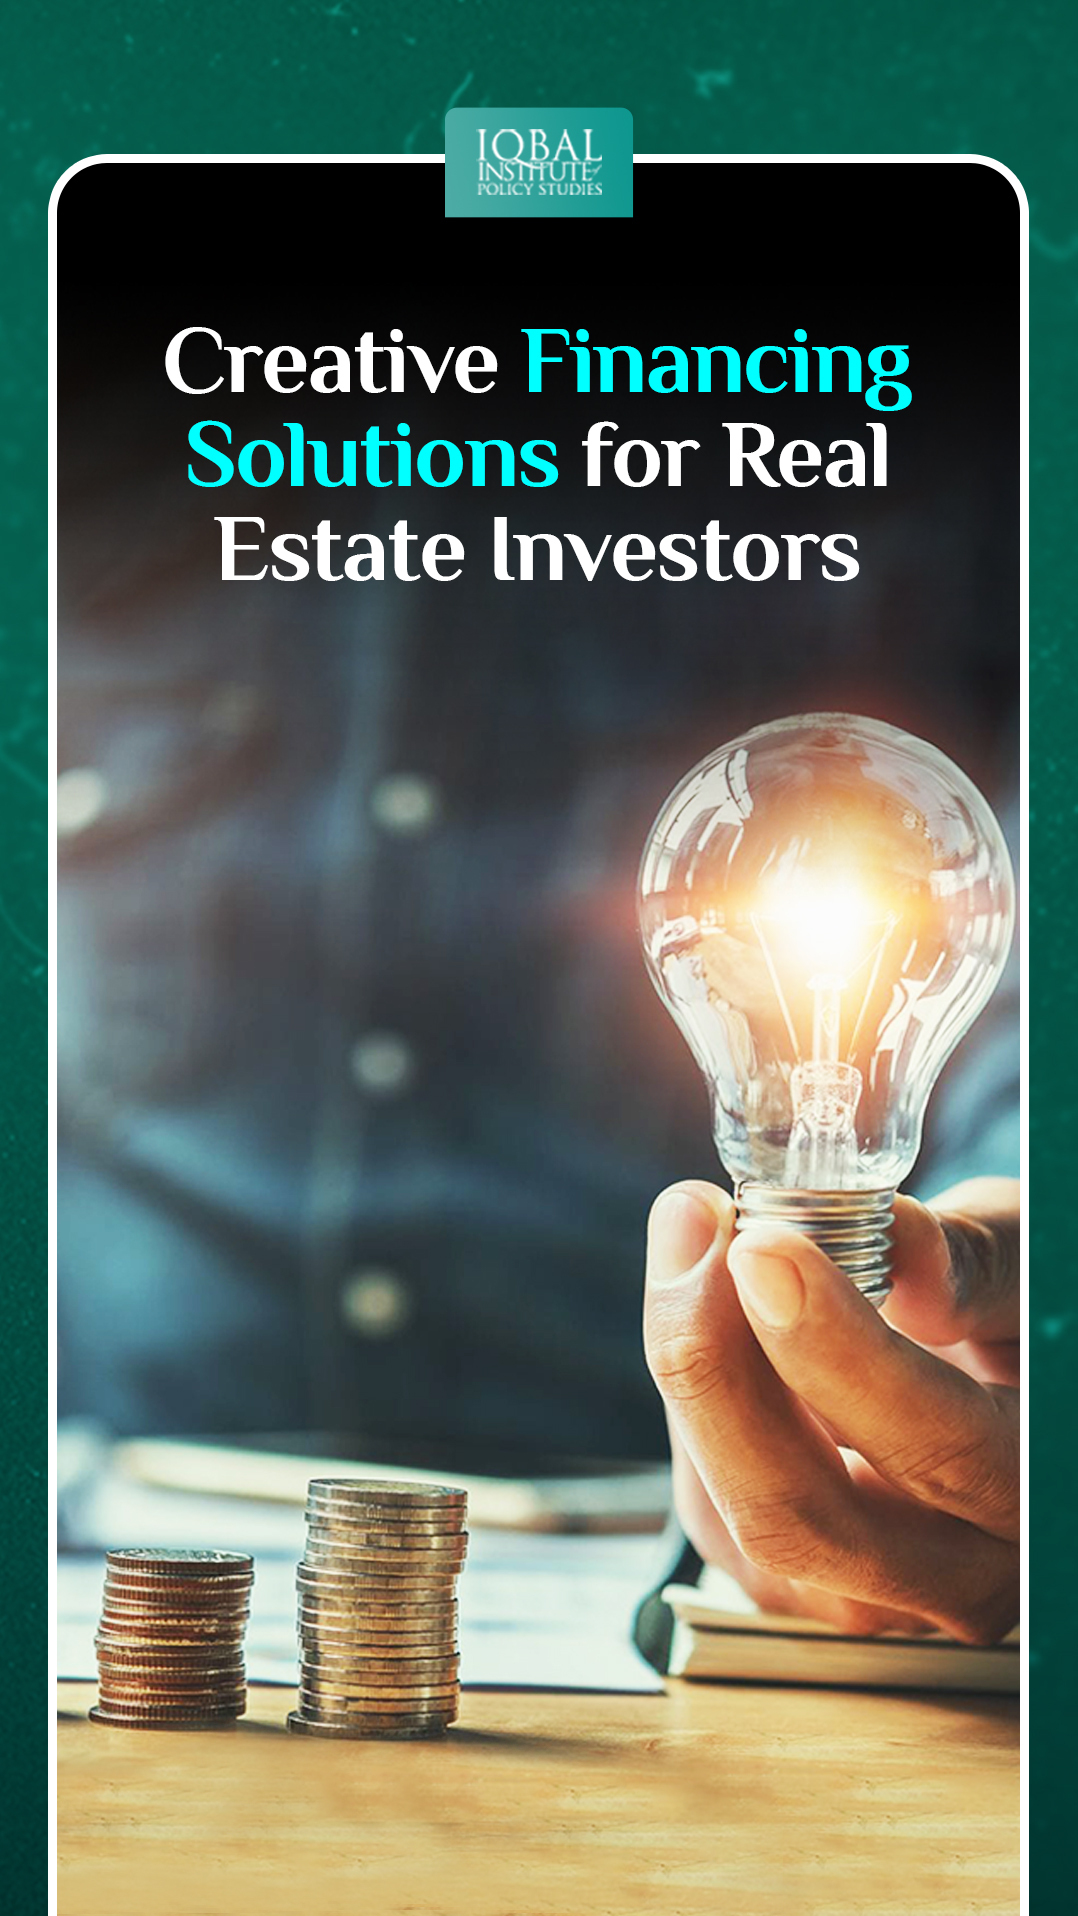 Creative Financing Solutions for Real Estate Investors